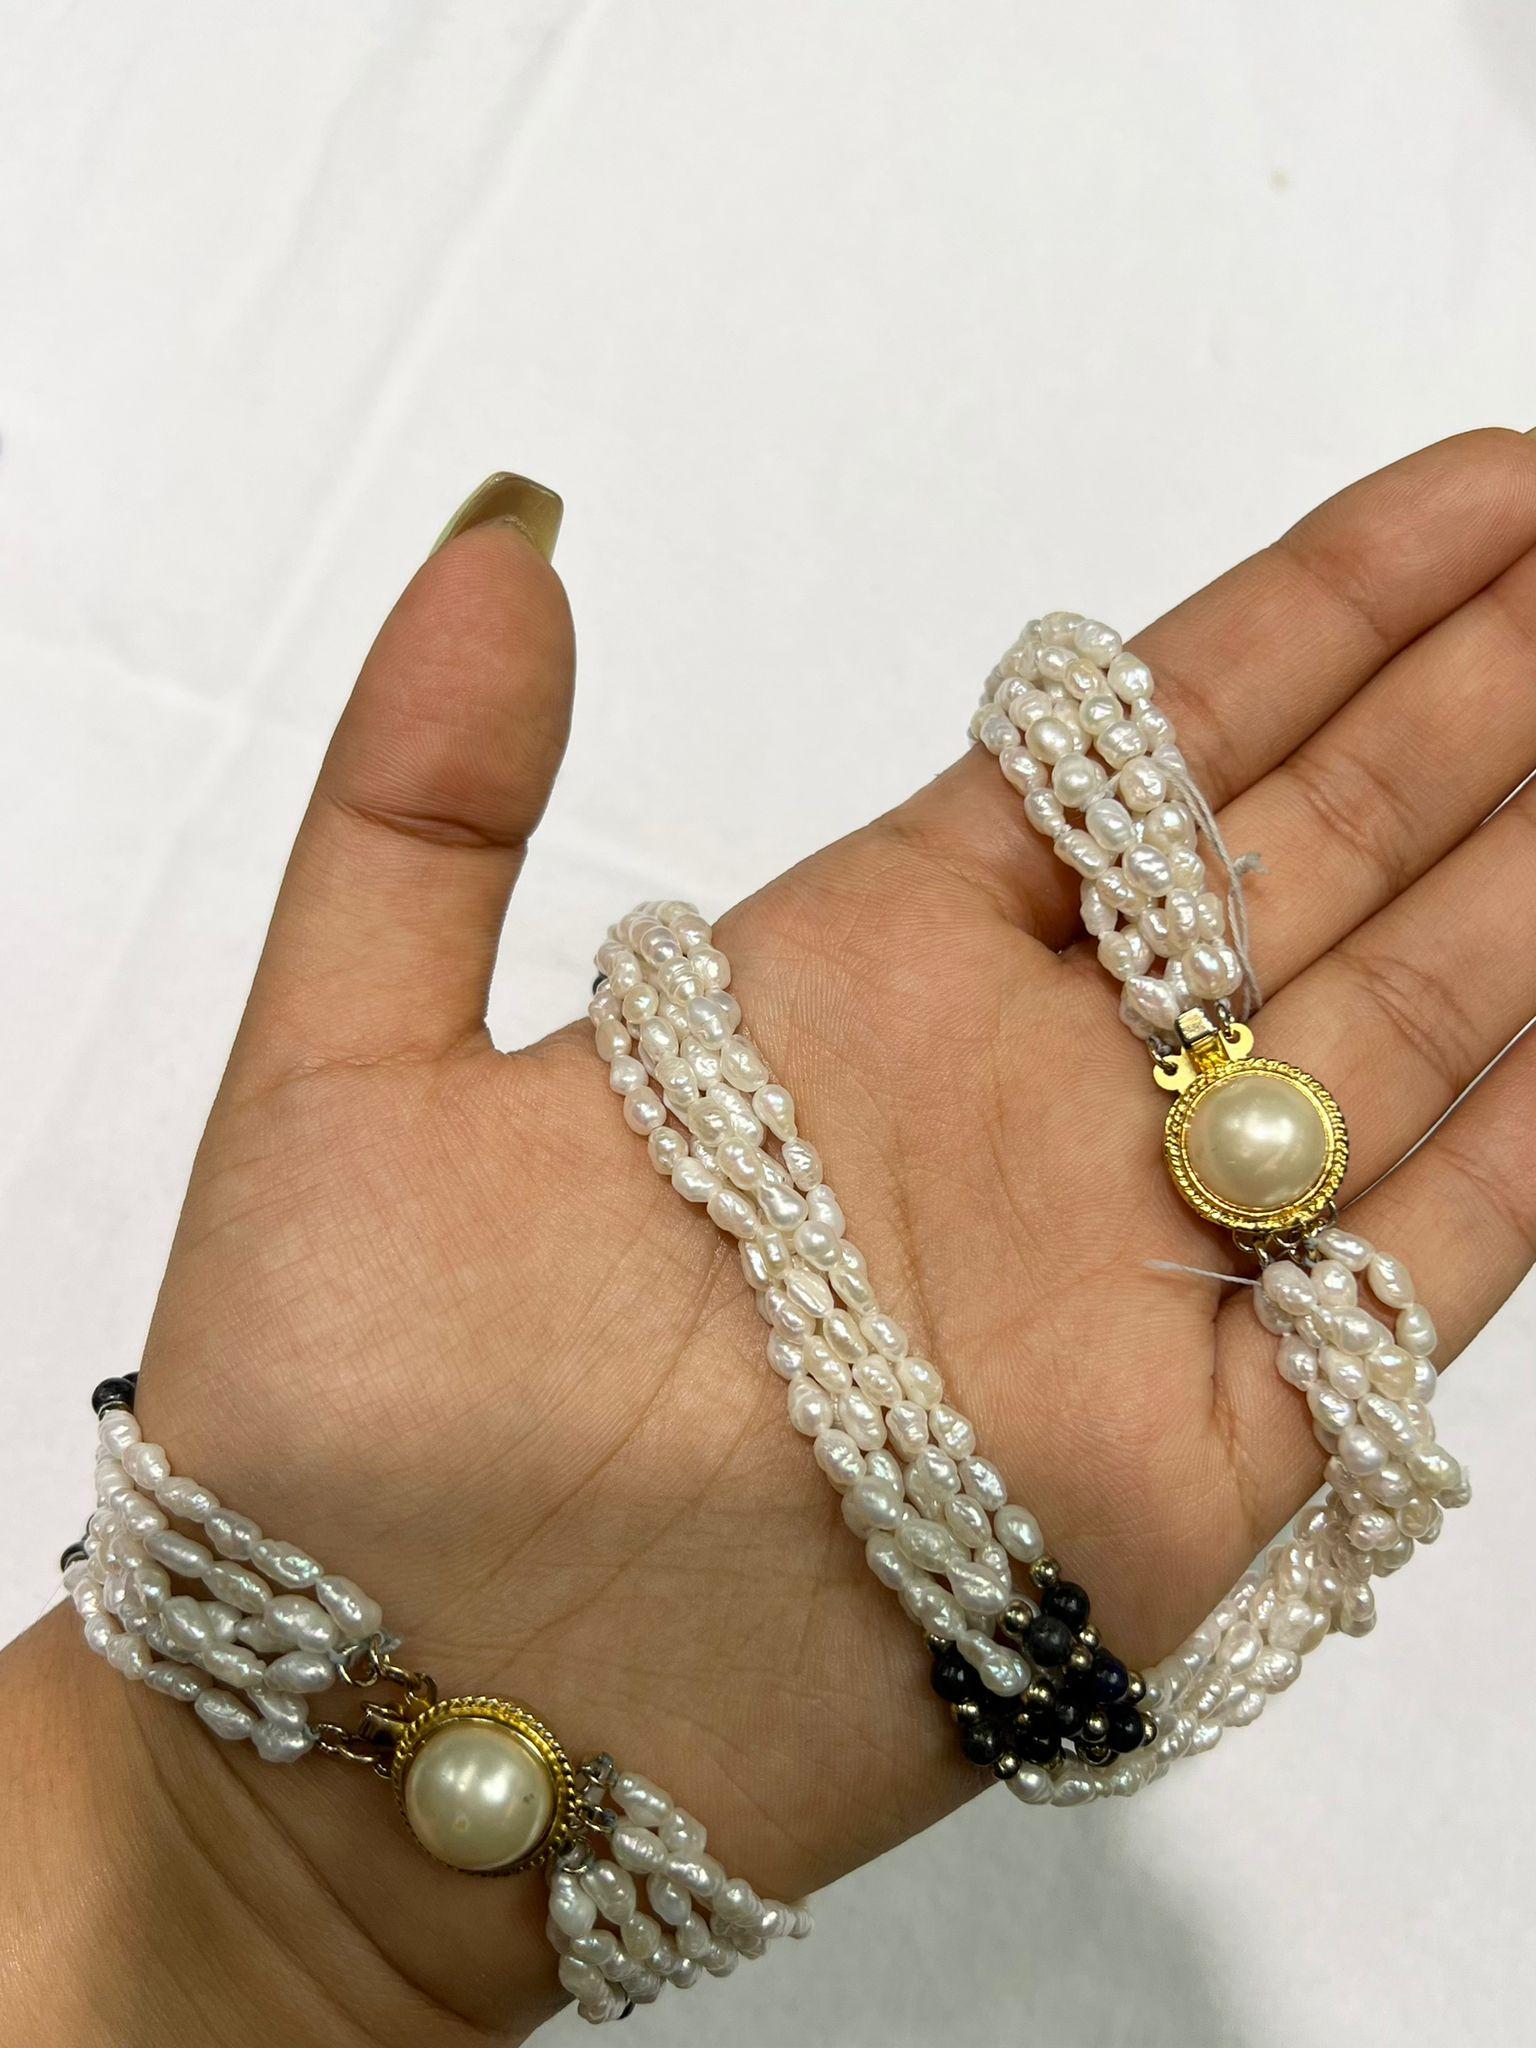 Set of Necklace and Bracelet Freshwater Pearls with Mabe Pearl Clasp Necklace 2 In Excellent Condition For Sale In LA, CA